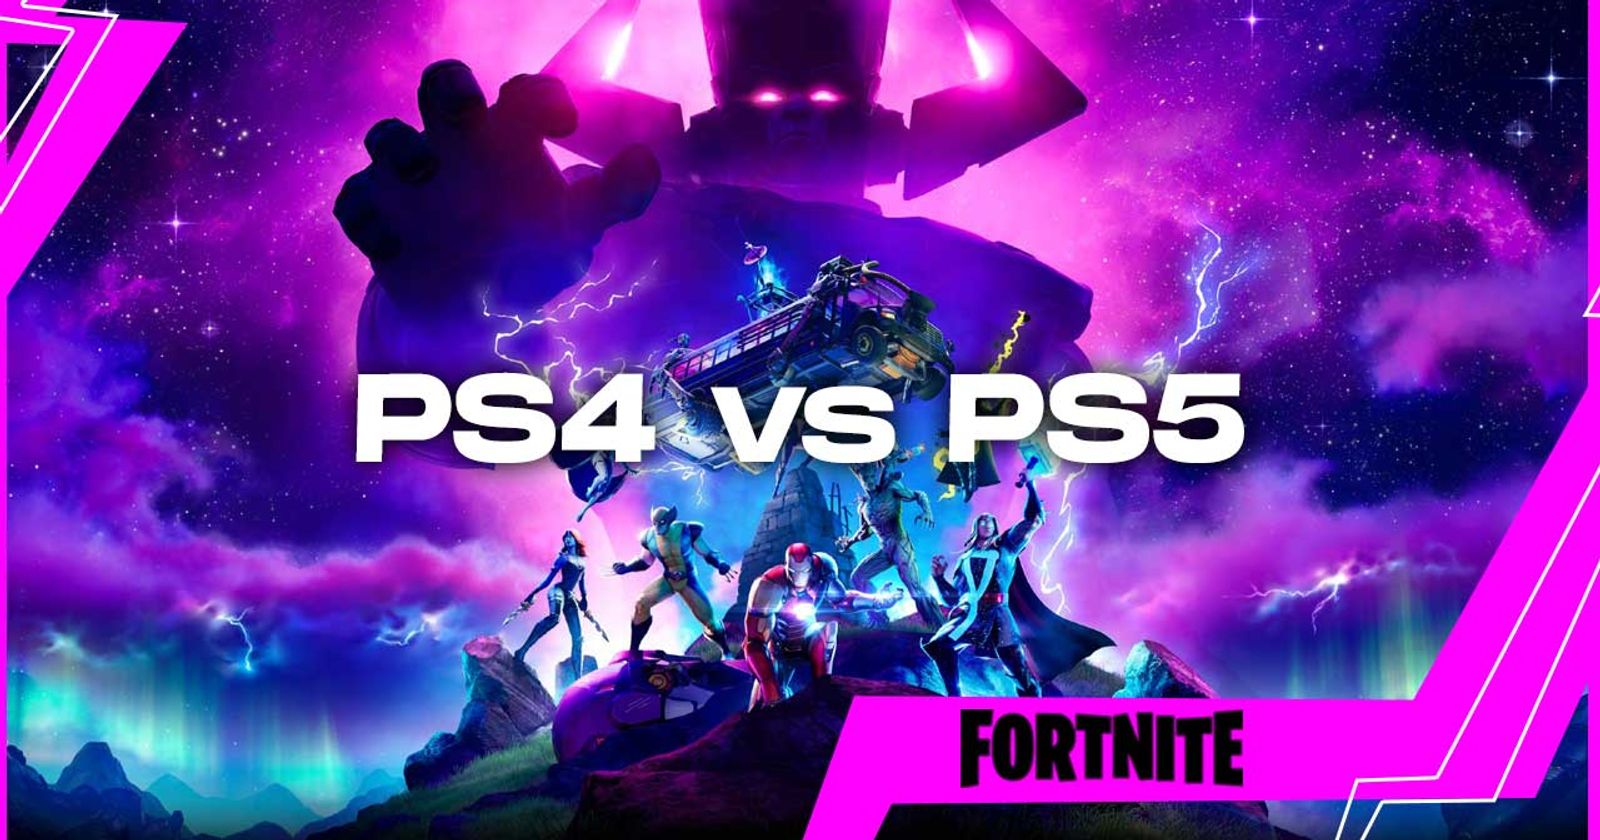 Fortnite Completes Transition to Full-Blown PS5, PS4 Platform with